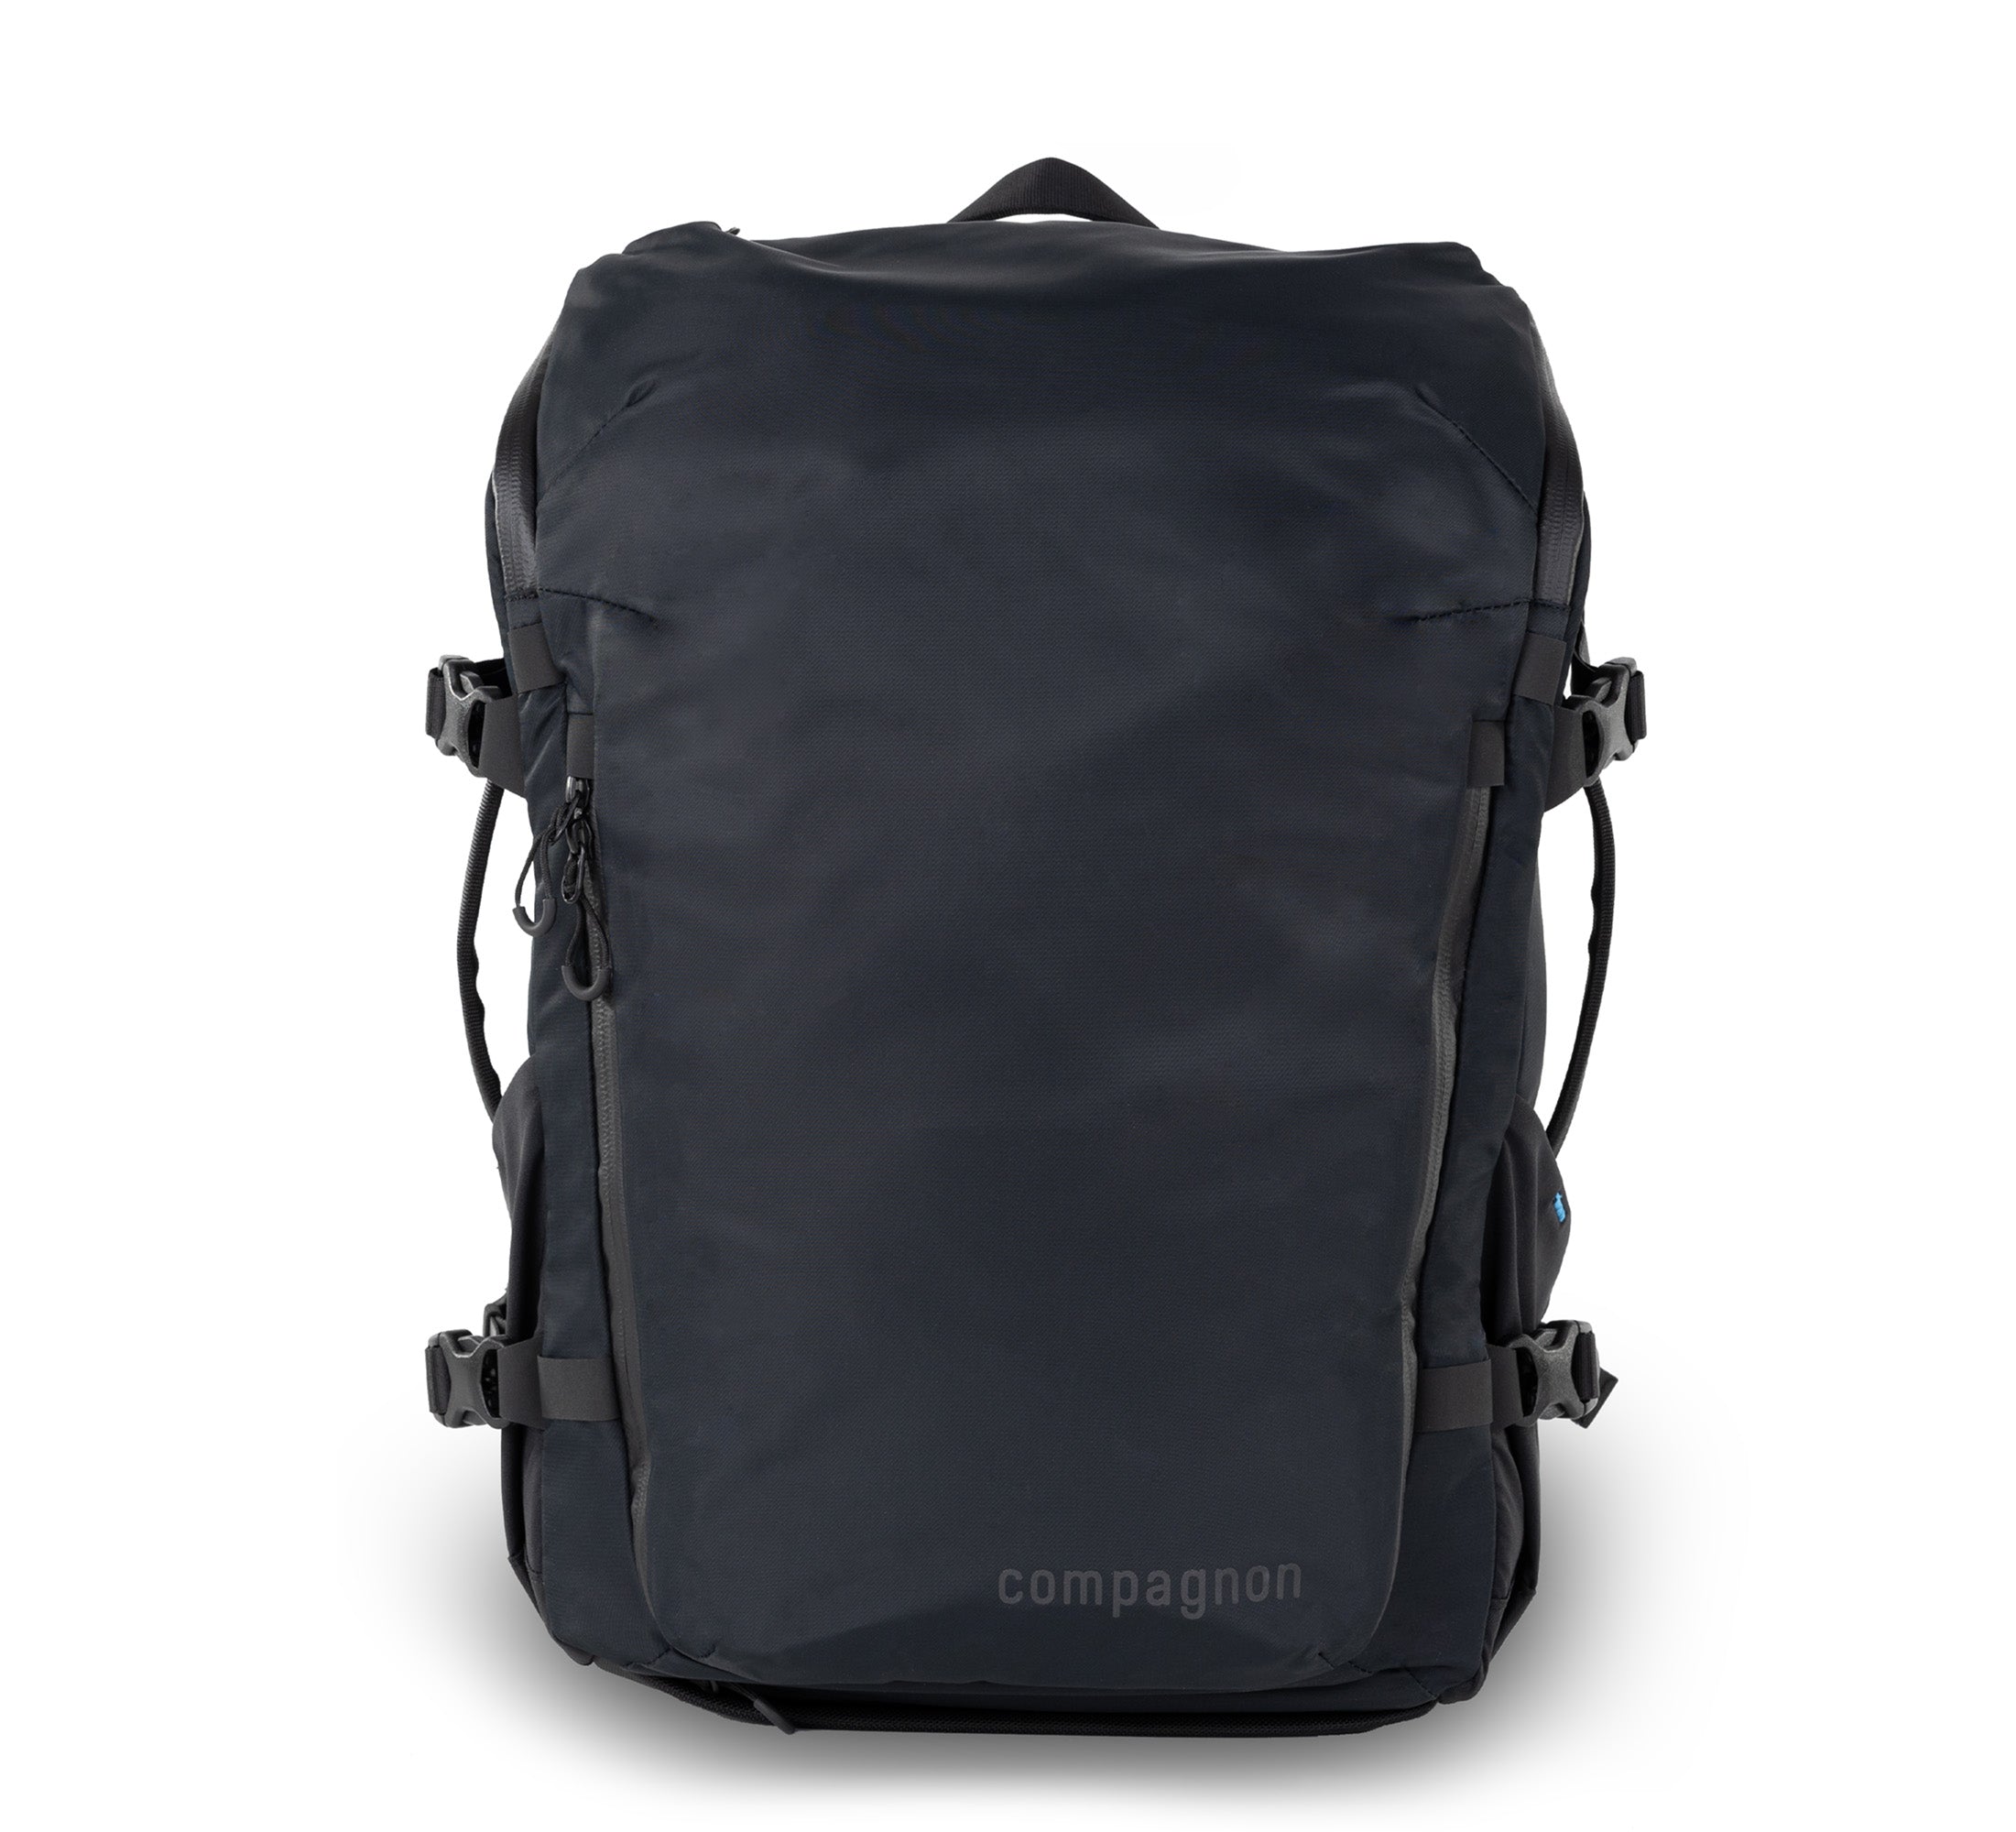 Adapt backpack 25L - Backpack only